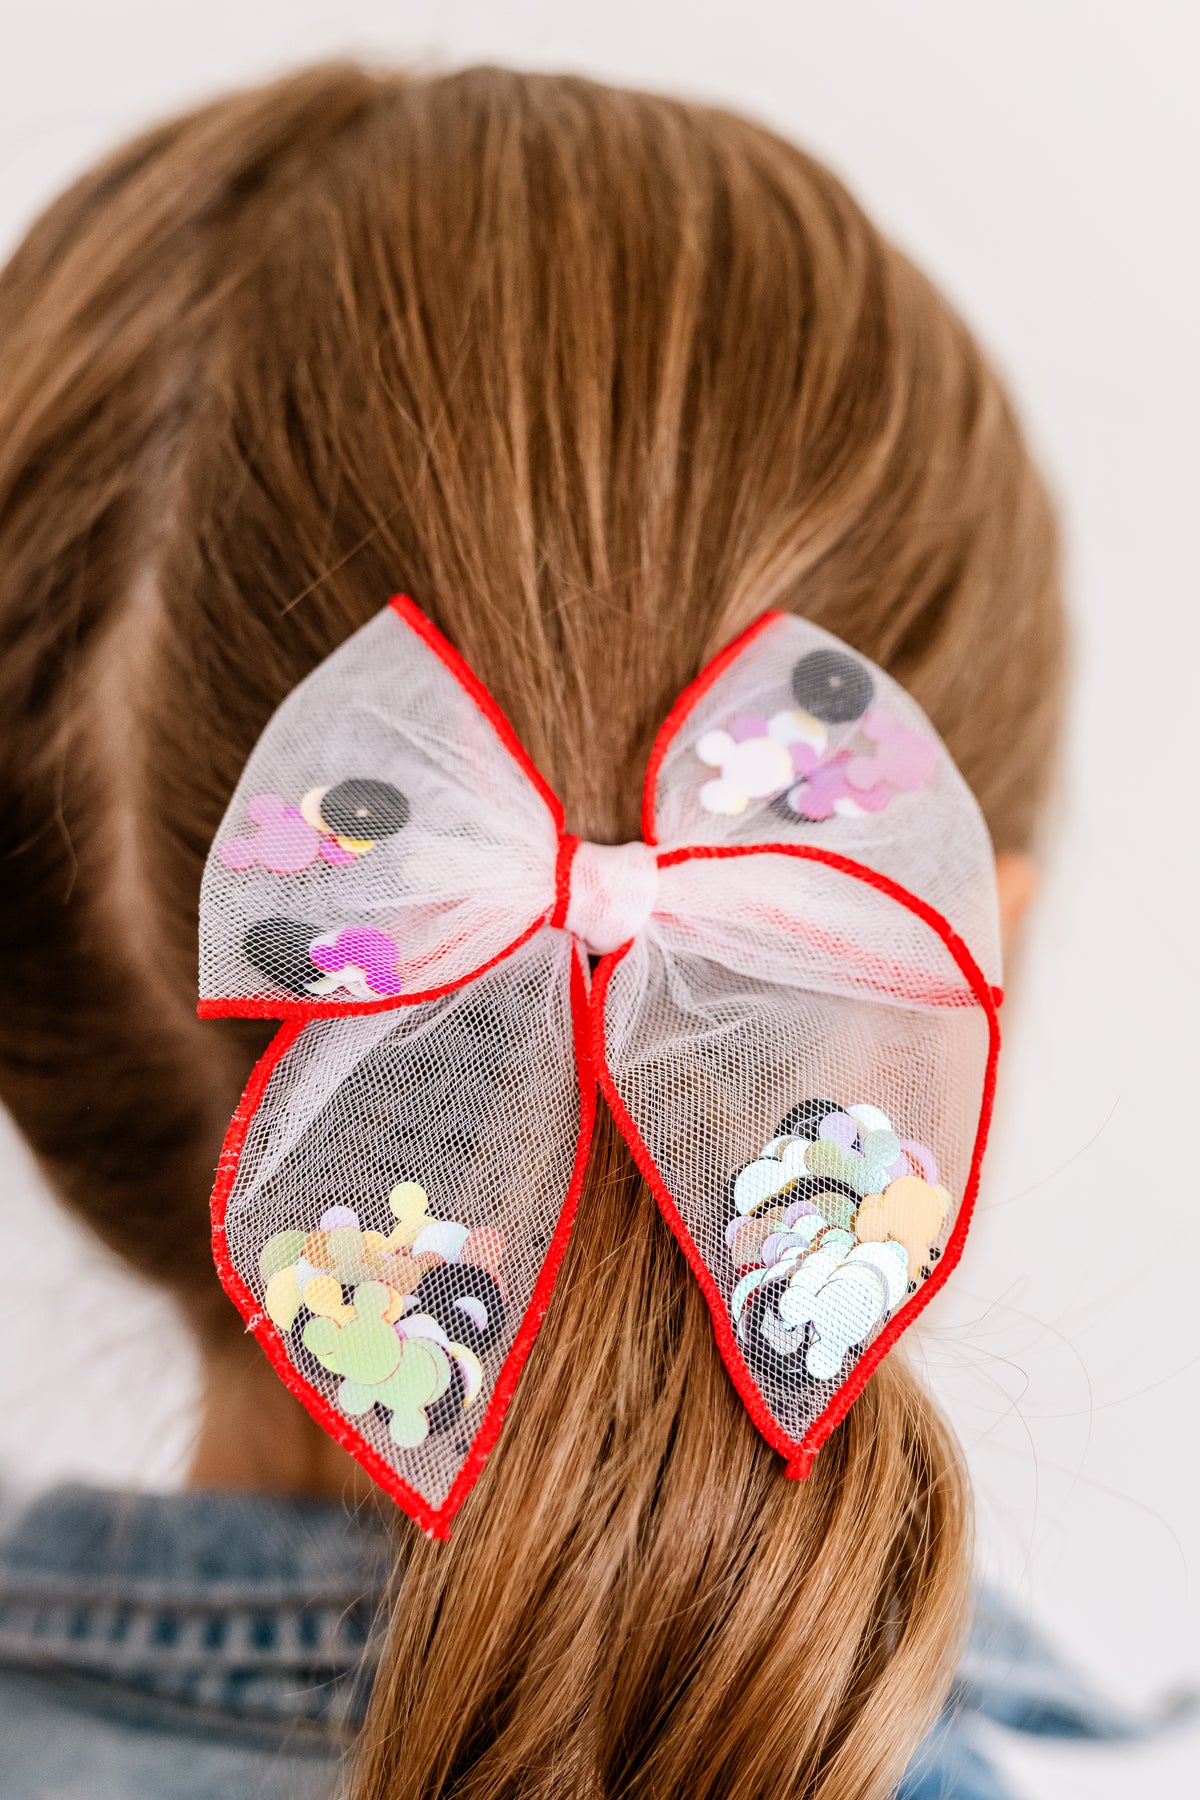 Zip-A-Dee-Doo-Dah Shaker Whimsy Pigtail Set | Happiest Place Collection